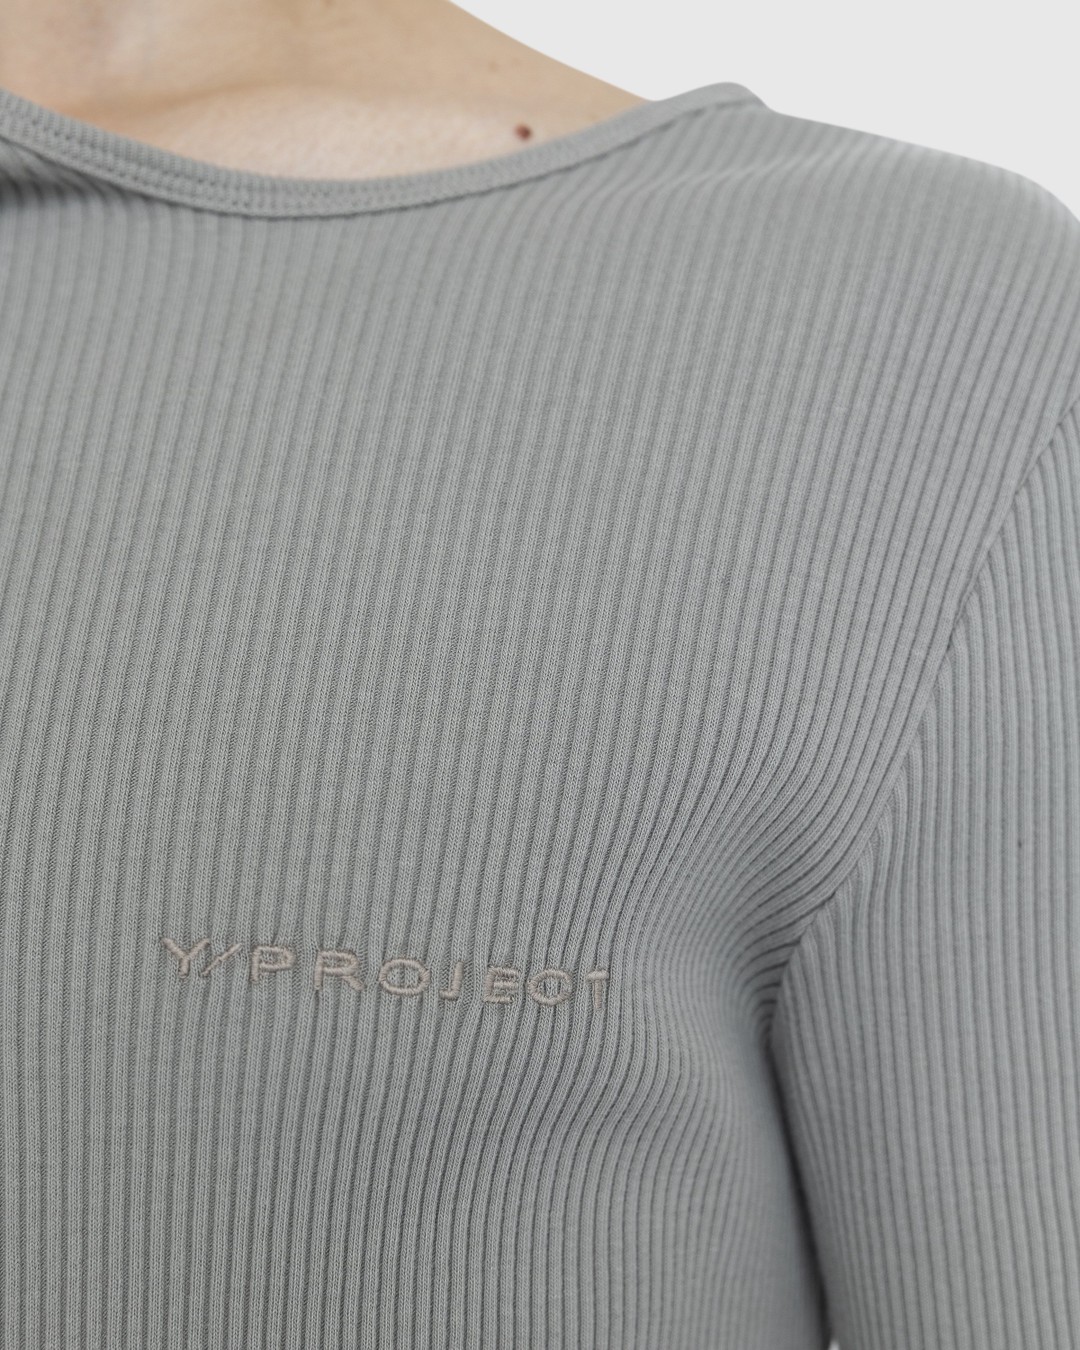 Y/Project – Classic Double Collar T-Shirt Taupe - Tops - Grey - Image 7